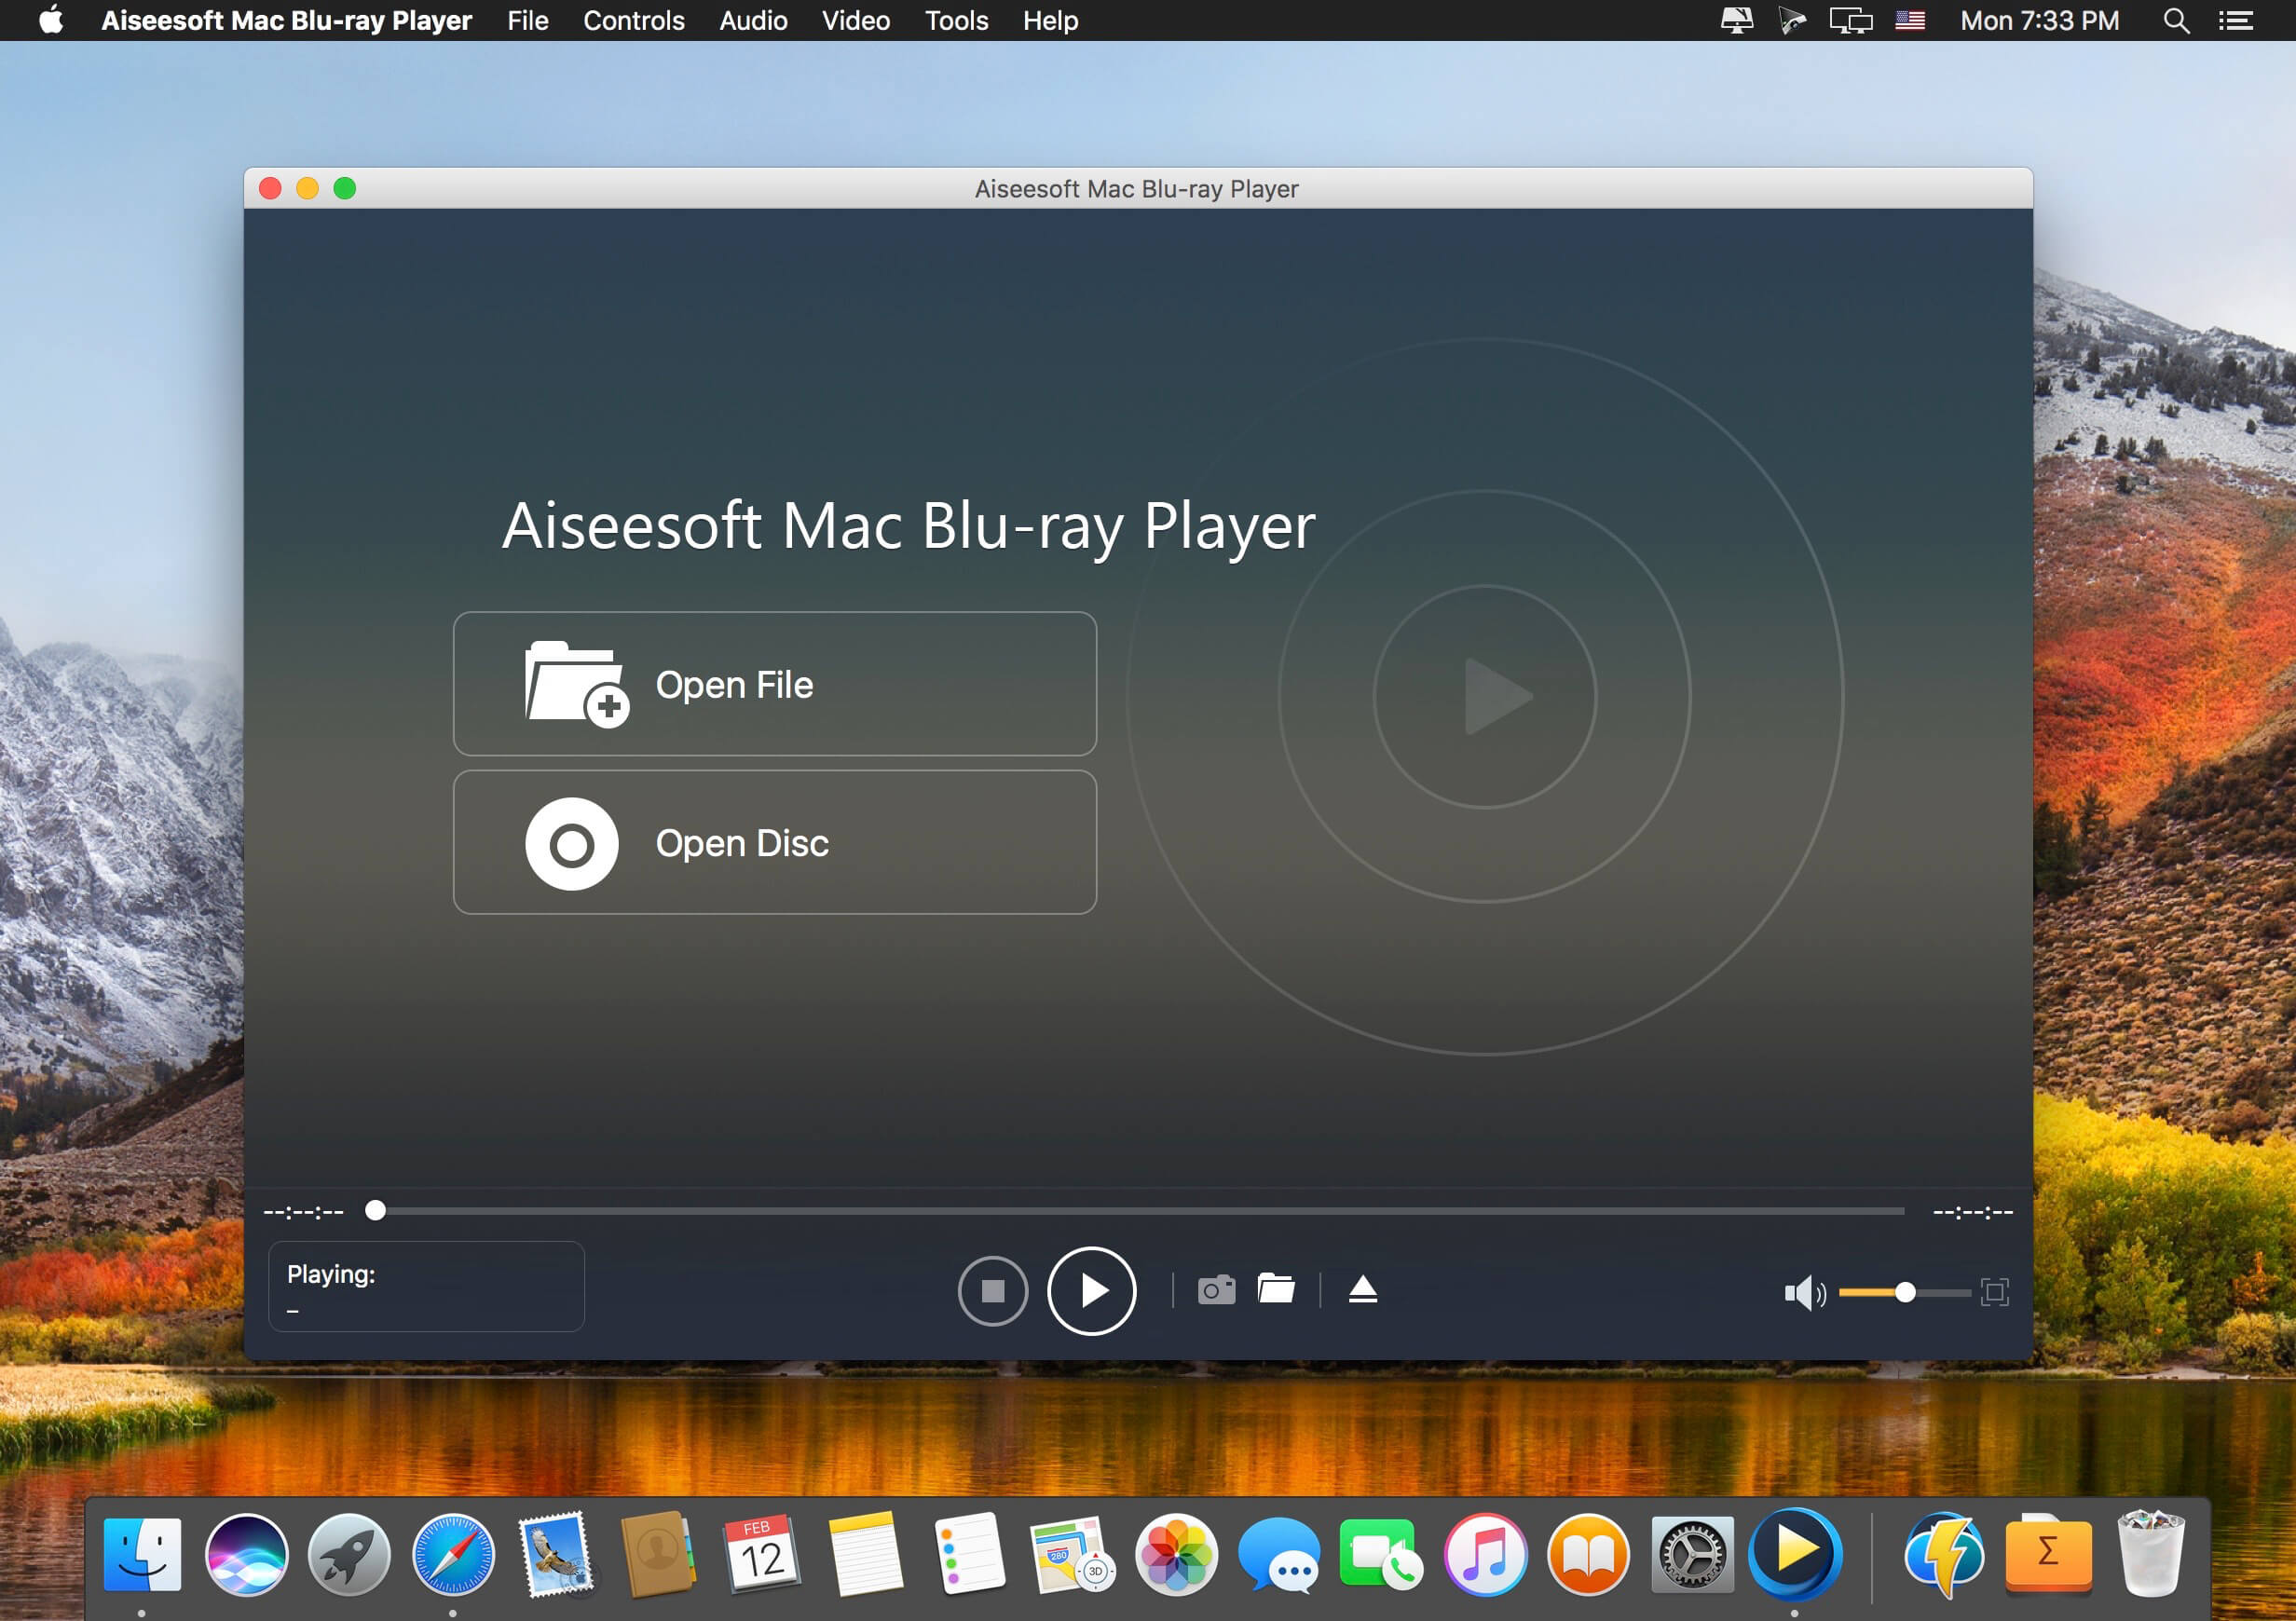 instal the new version for mac AnyMP4 Blu-ray Player 6.5.56